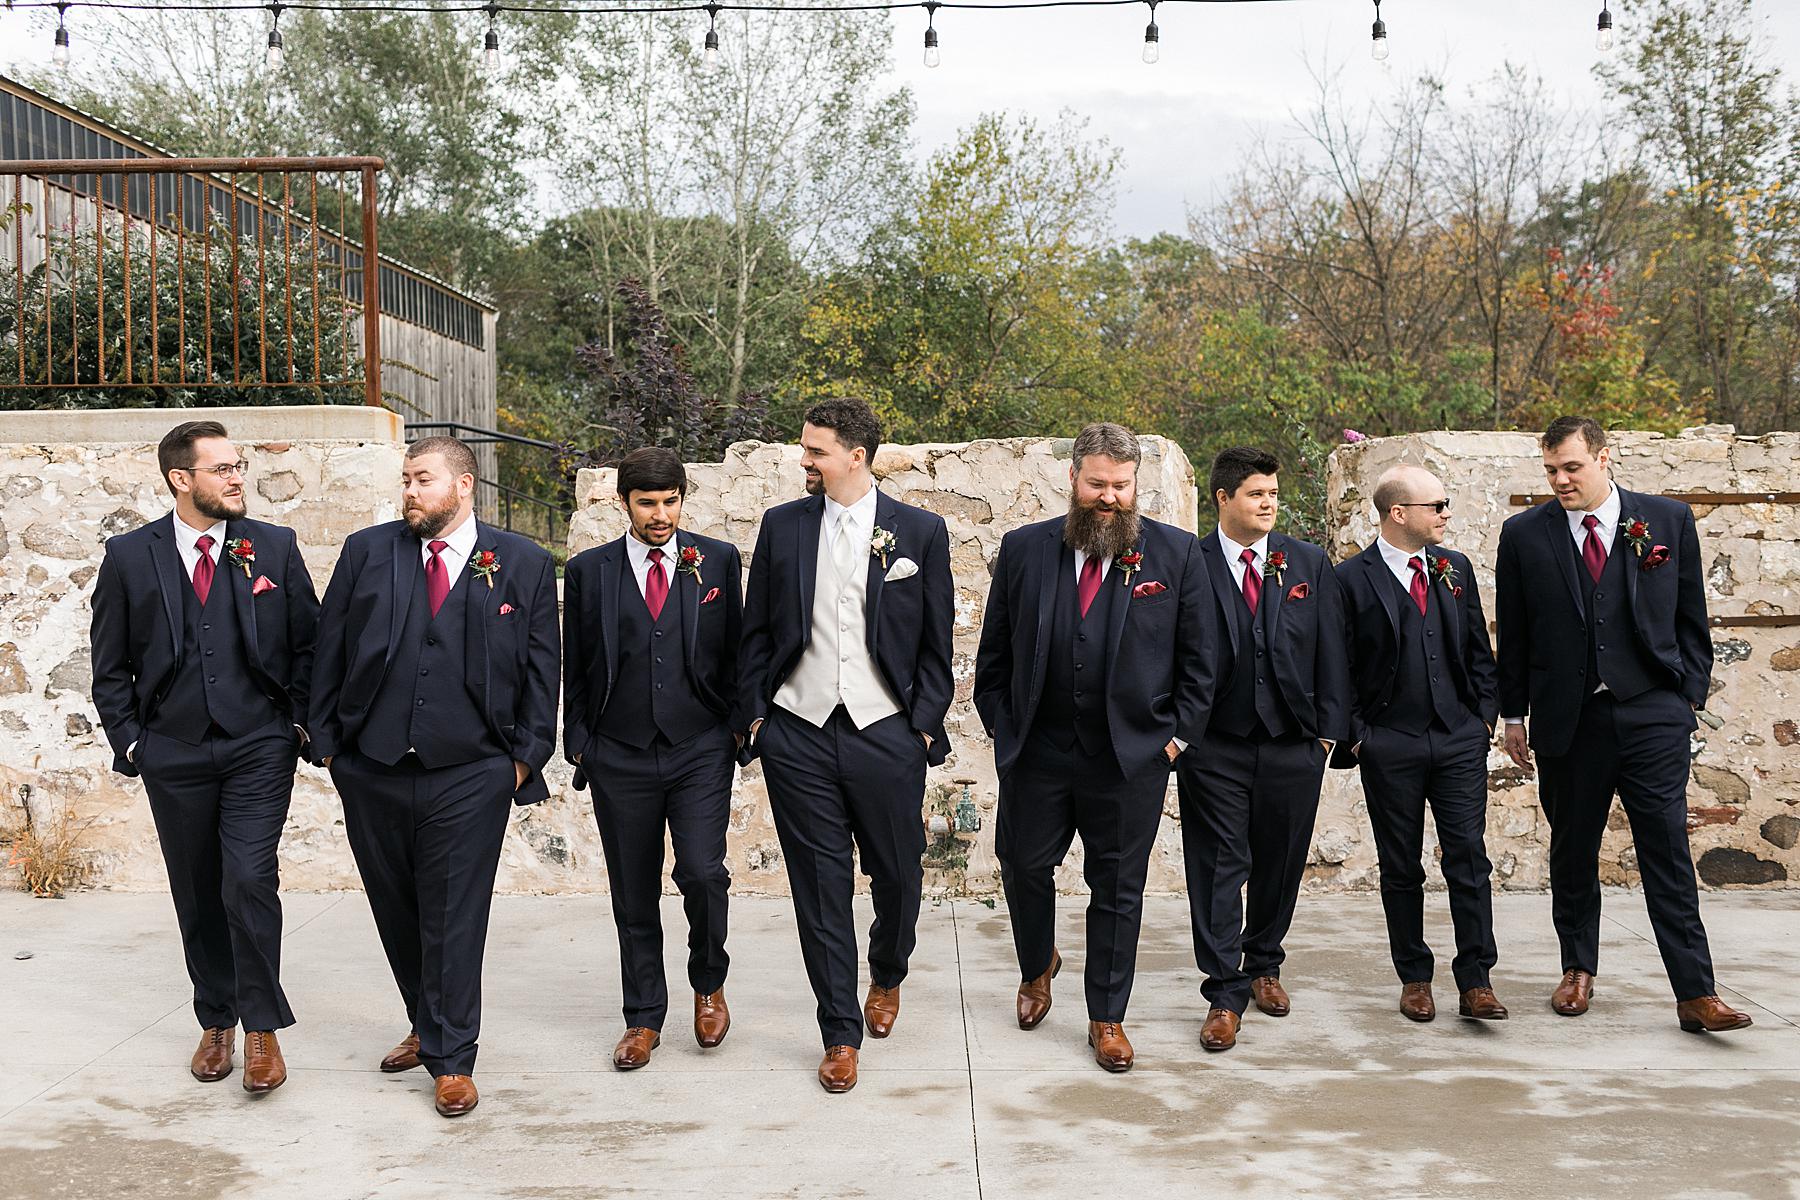 wedding party group in navy blue and maroon red fall wedding colors for rustic refined barn wedding at lilac acres in milwaukee, wisconsin